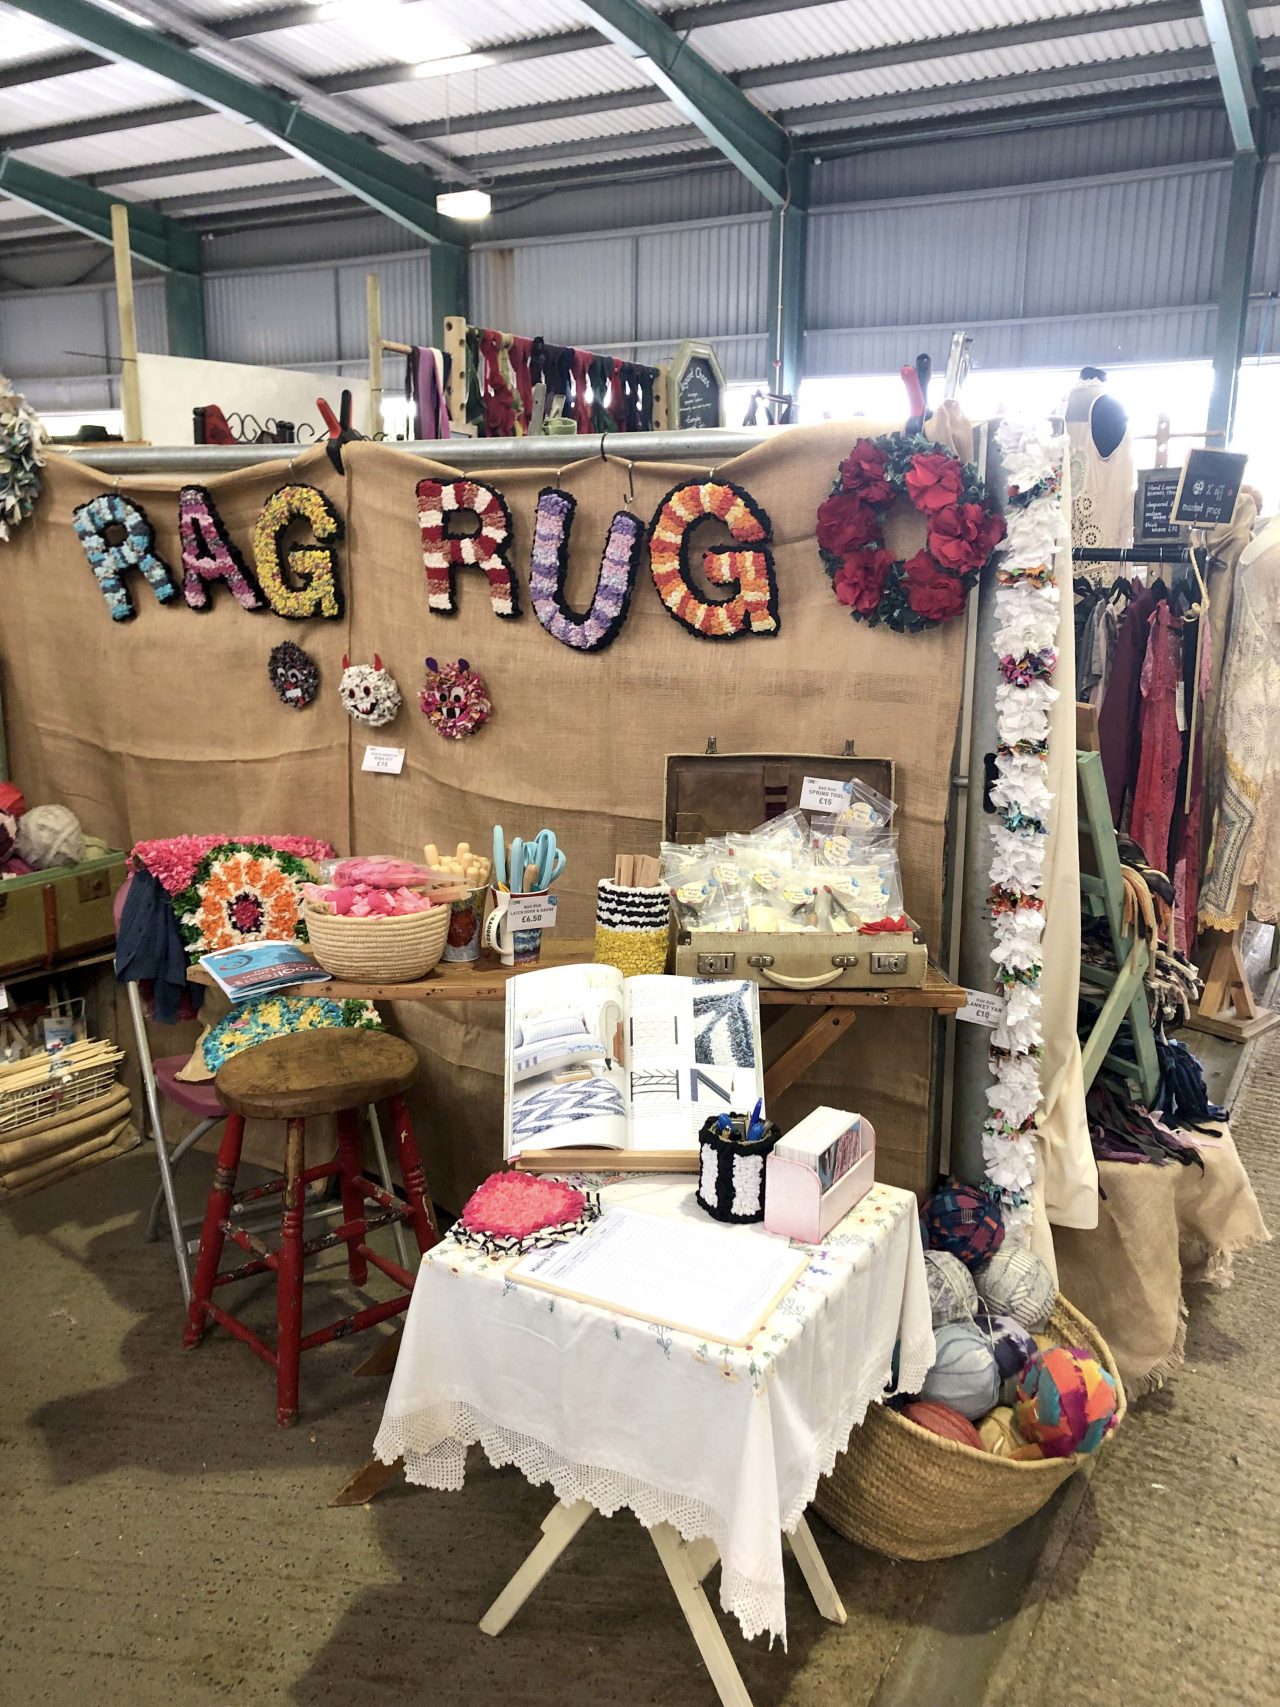 Ragged Life rag rug stand at Woolfest 2019 in Cockermouth, Cumbria festival